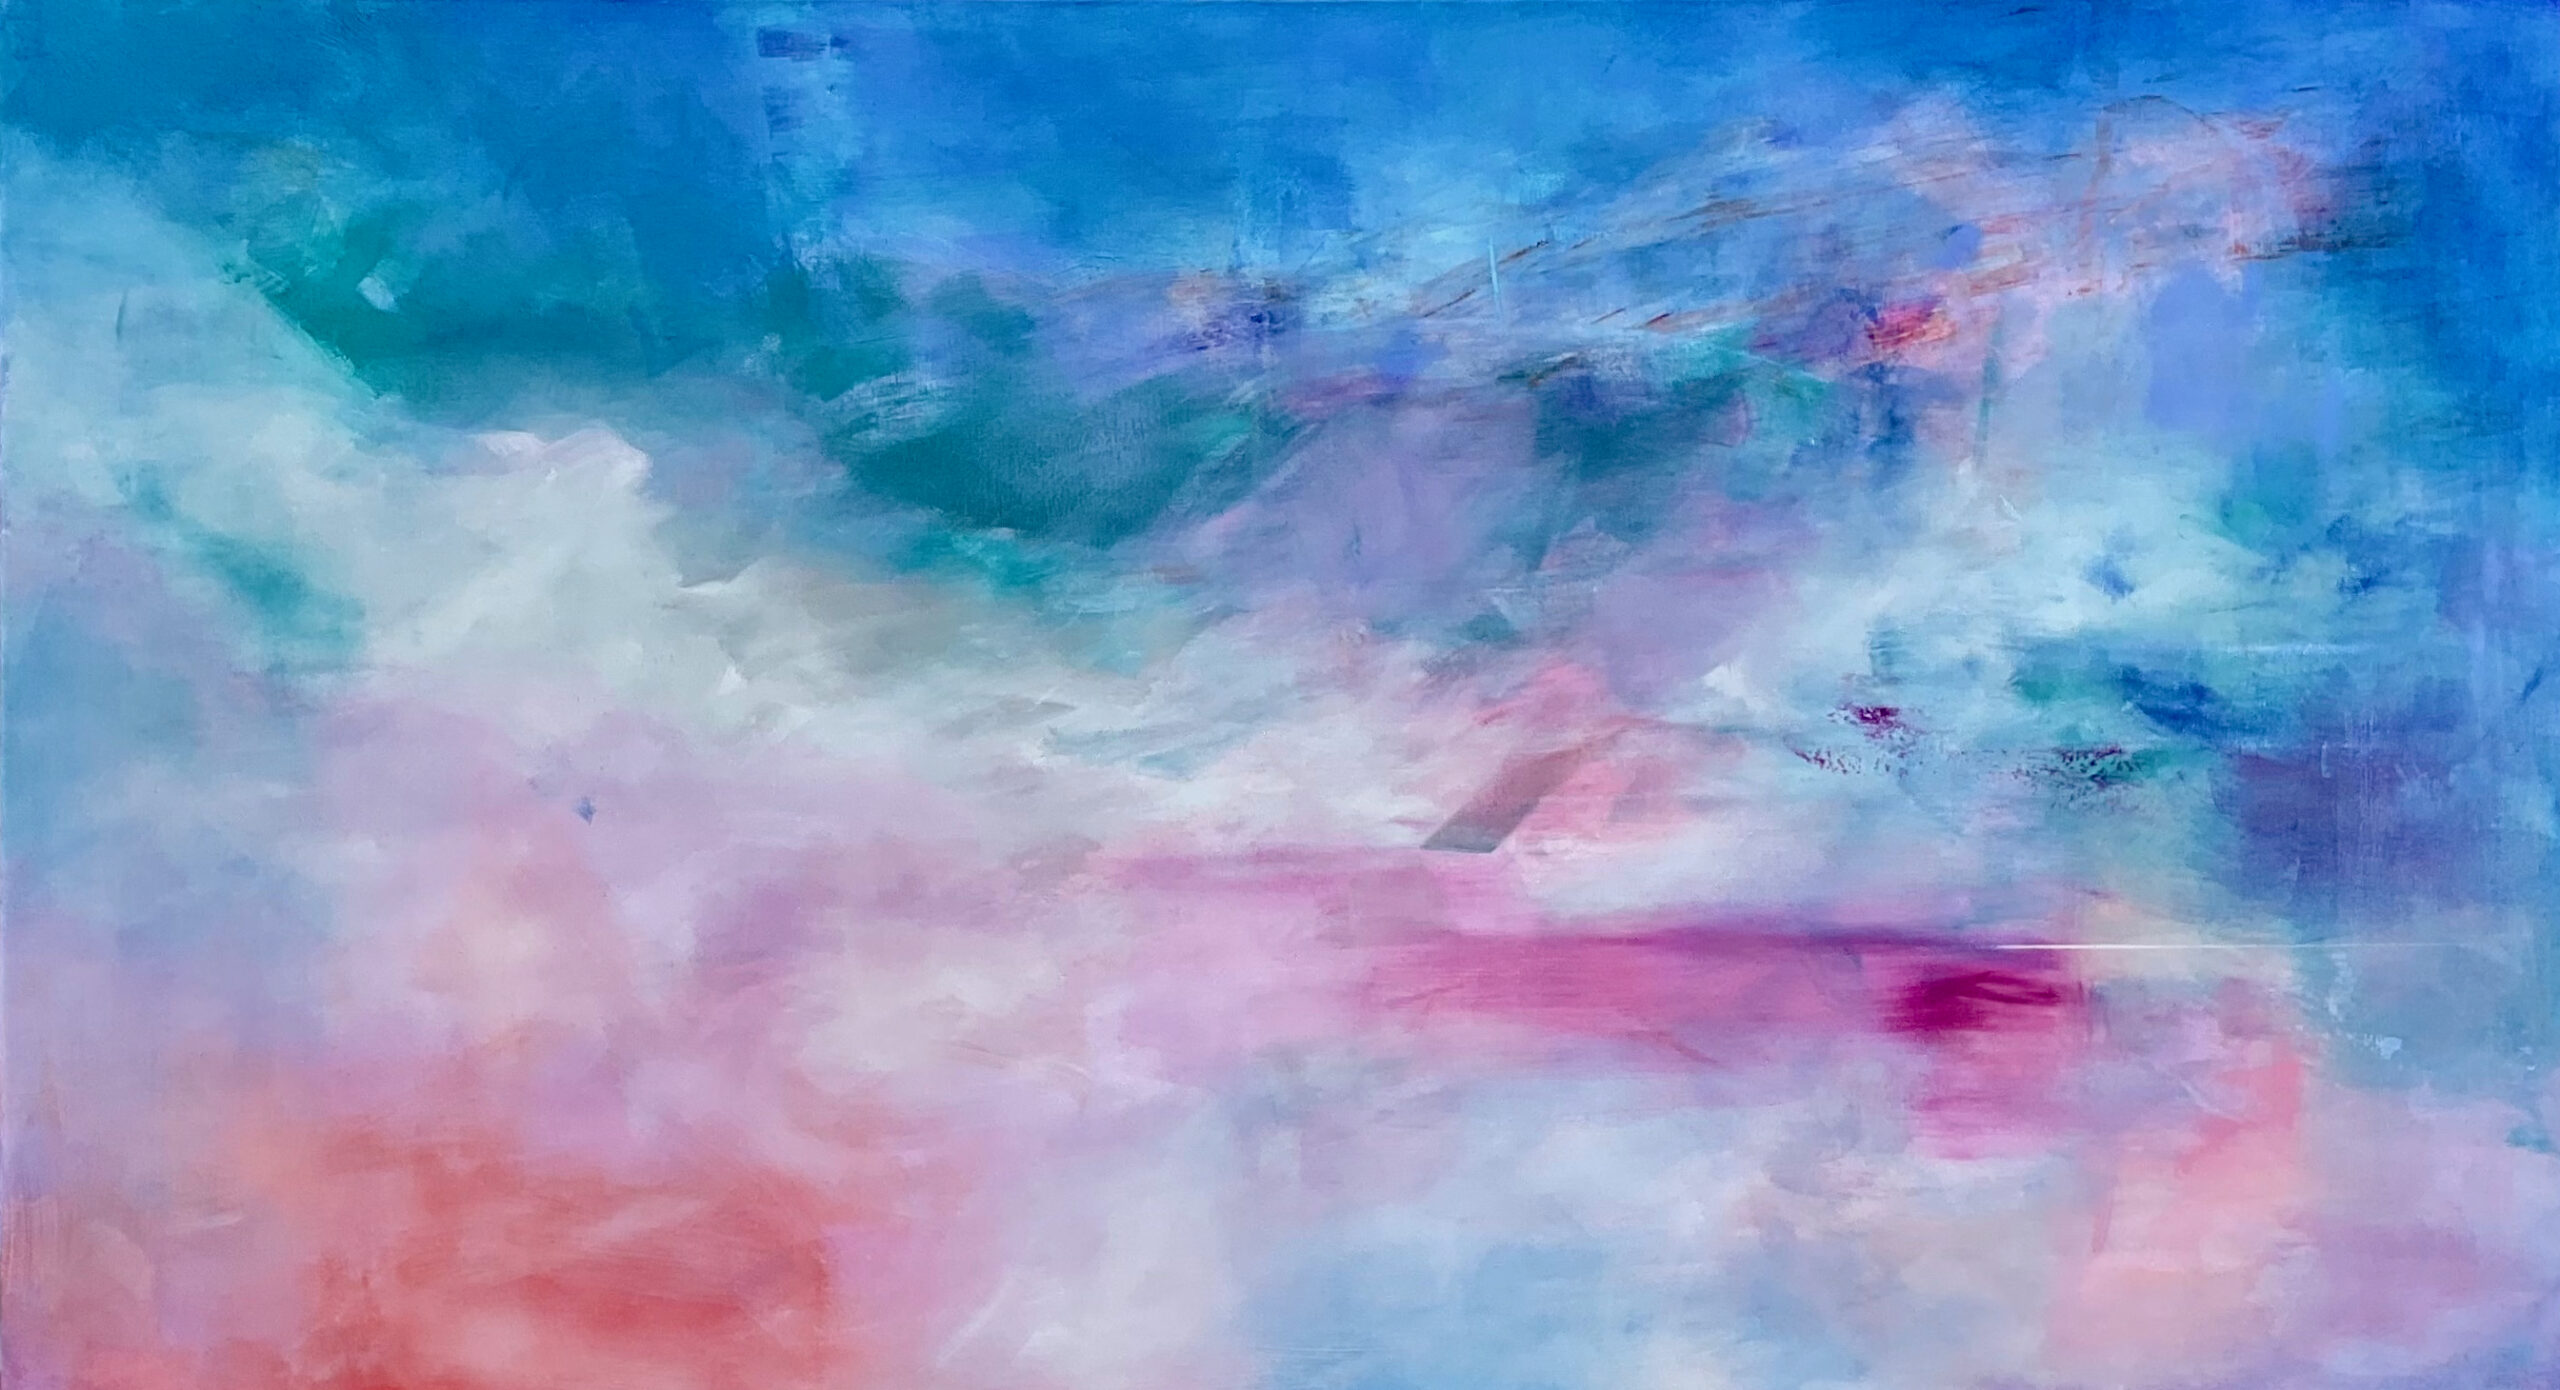 soft blues and magenta, abstract horizon and water forms